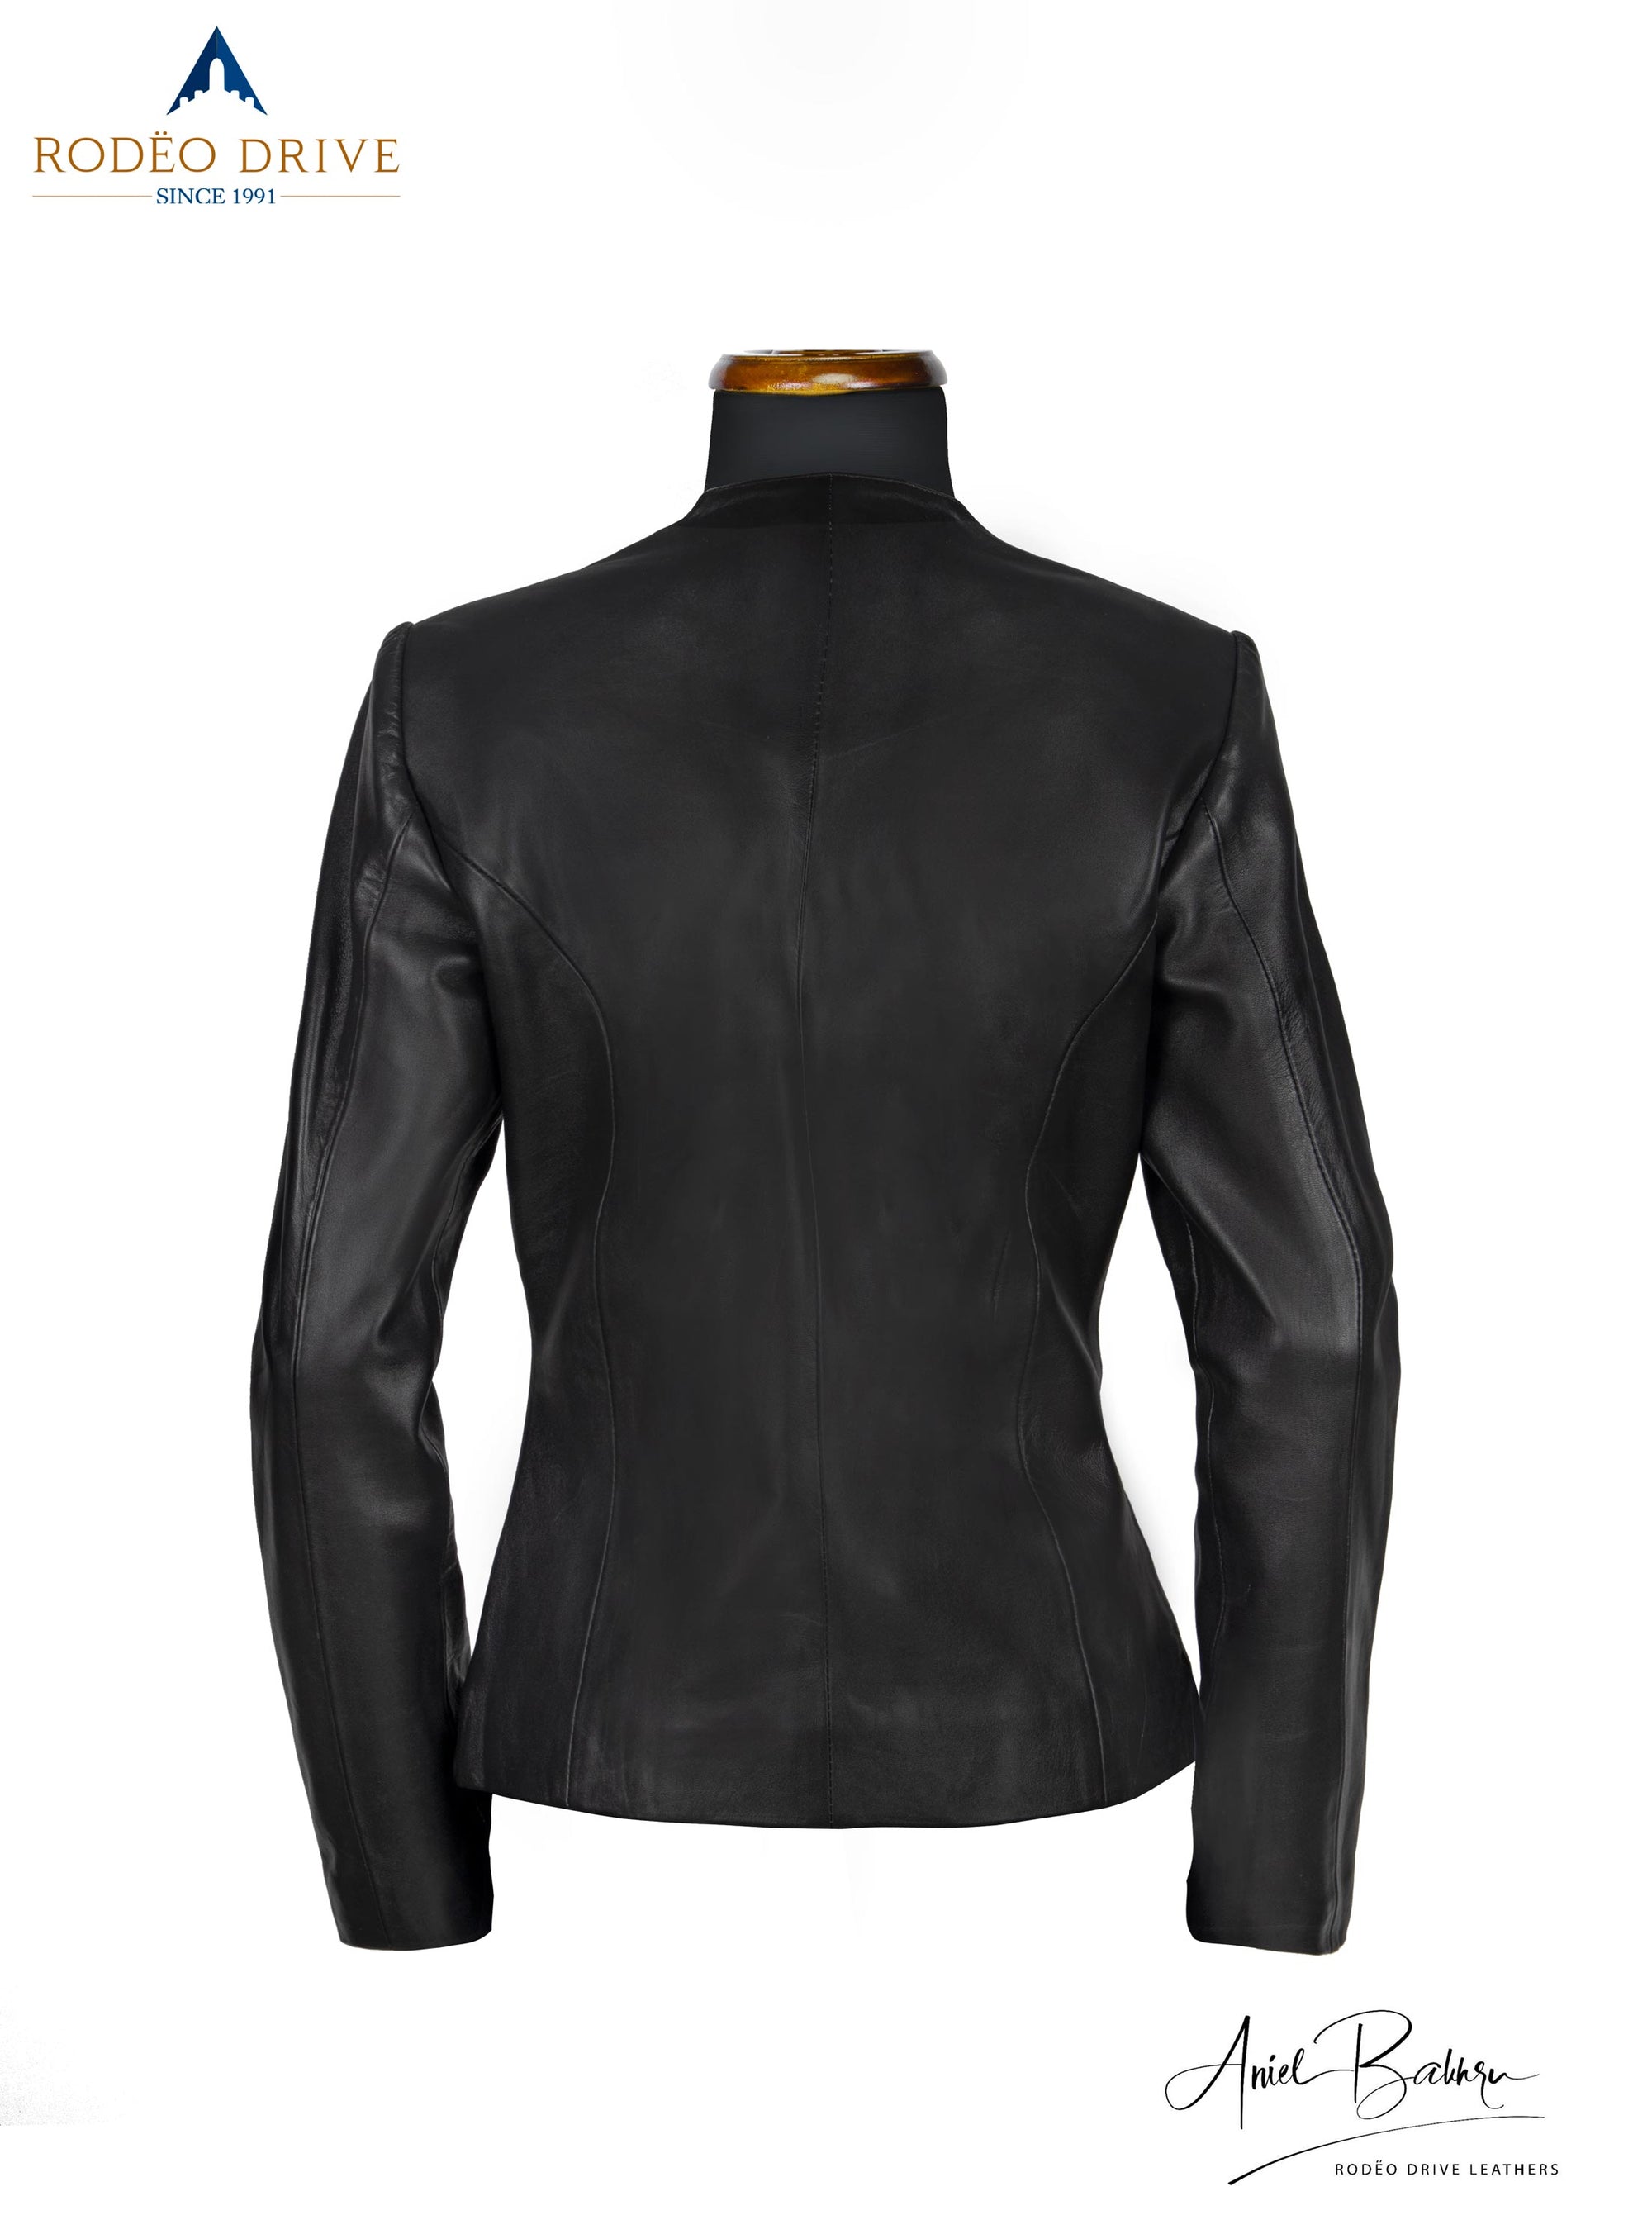 back side image of black CLASSIC CHANNEL JACKET.  turtle neck is visible